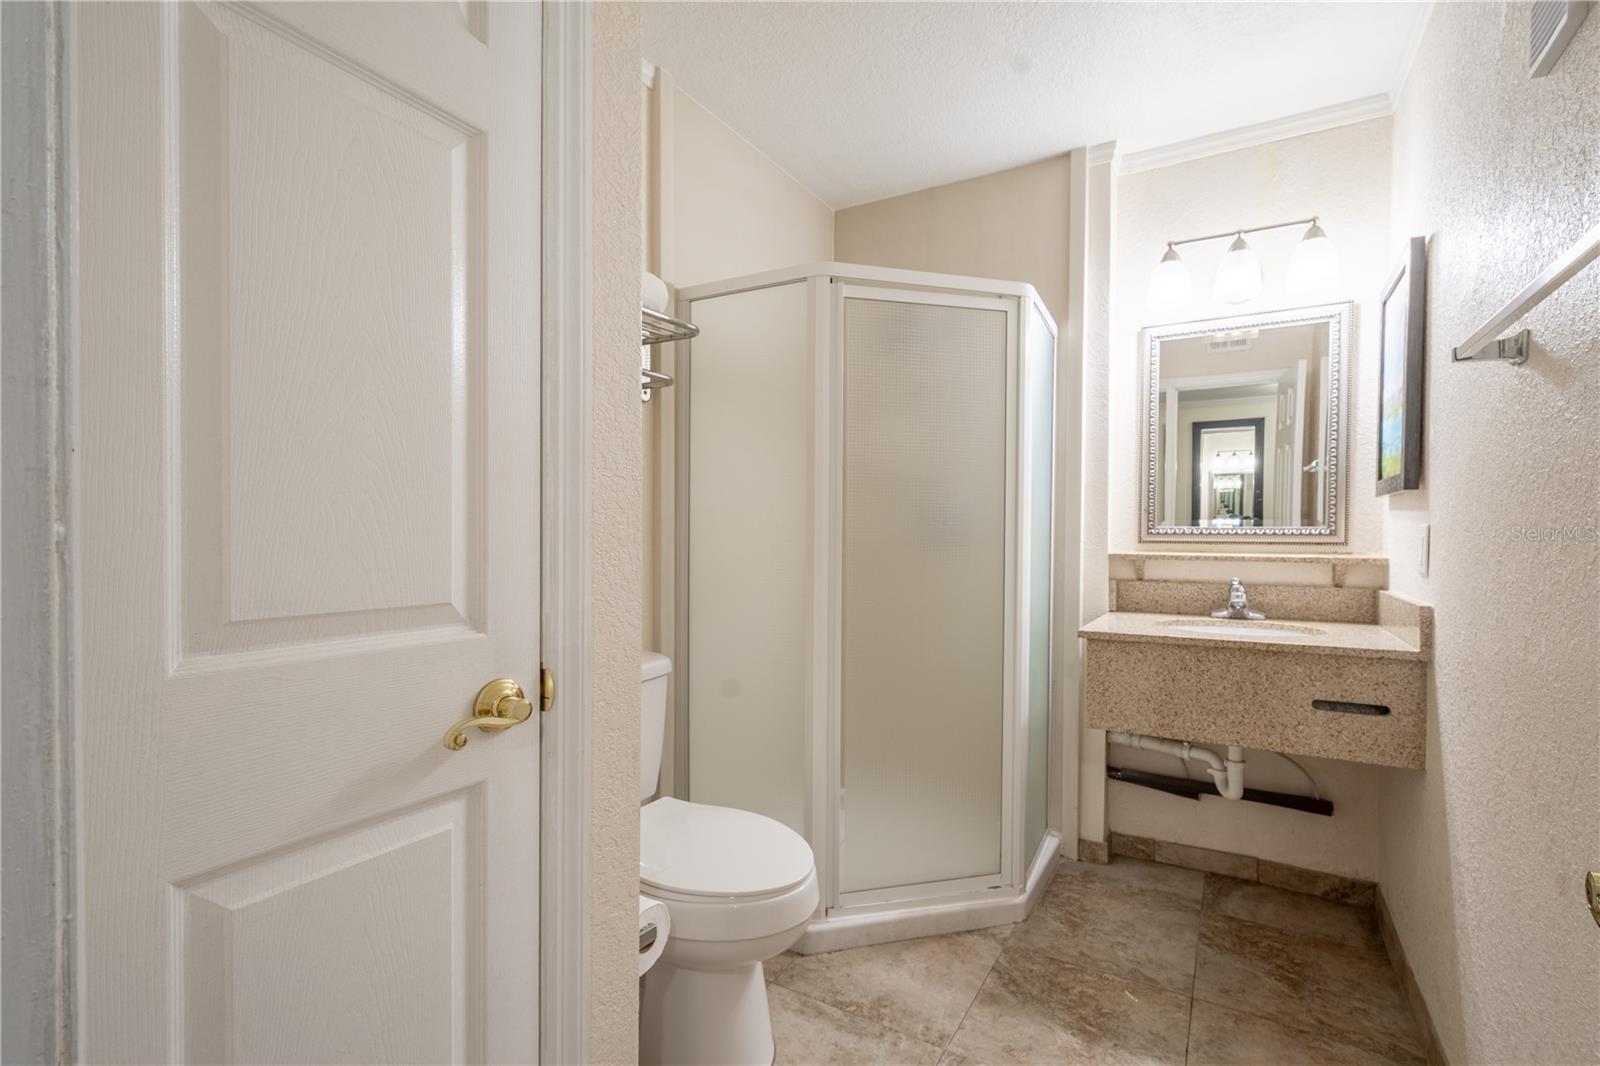 Bathroom 2 features a mirrored sink with granite counter, and a walk in shower